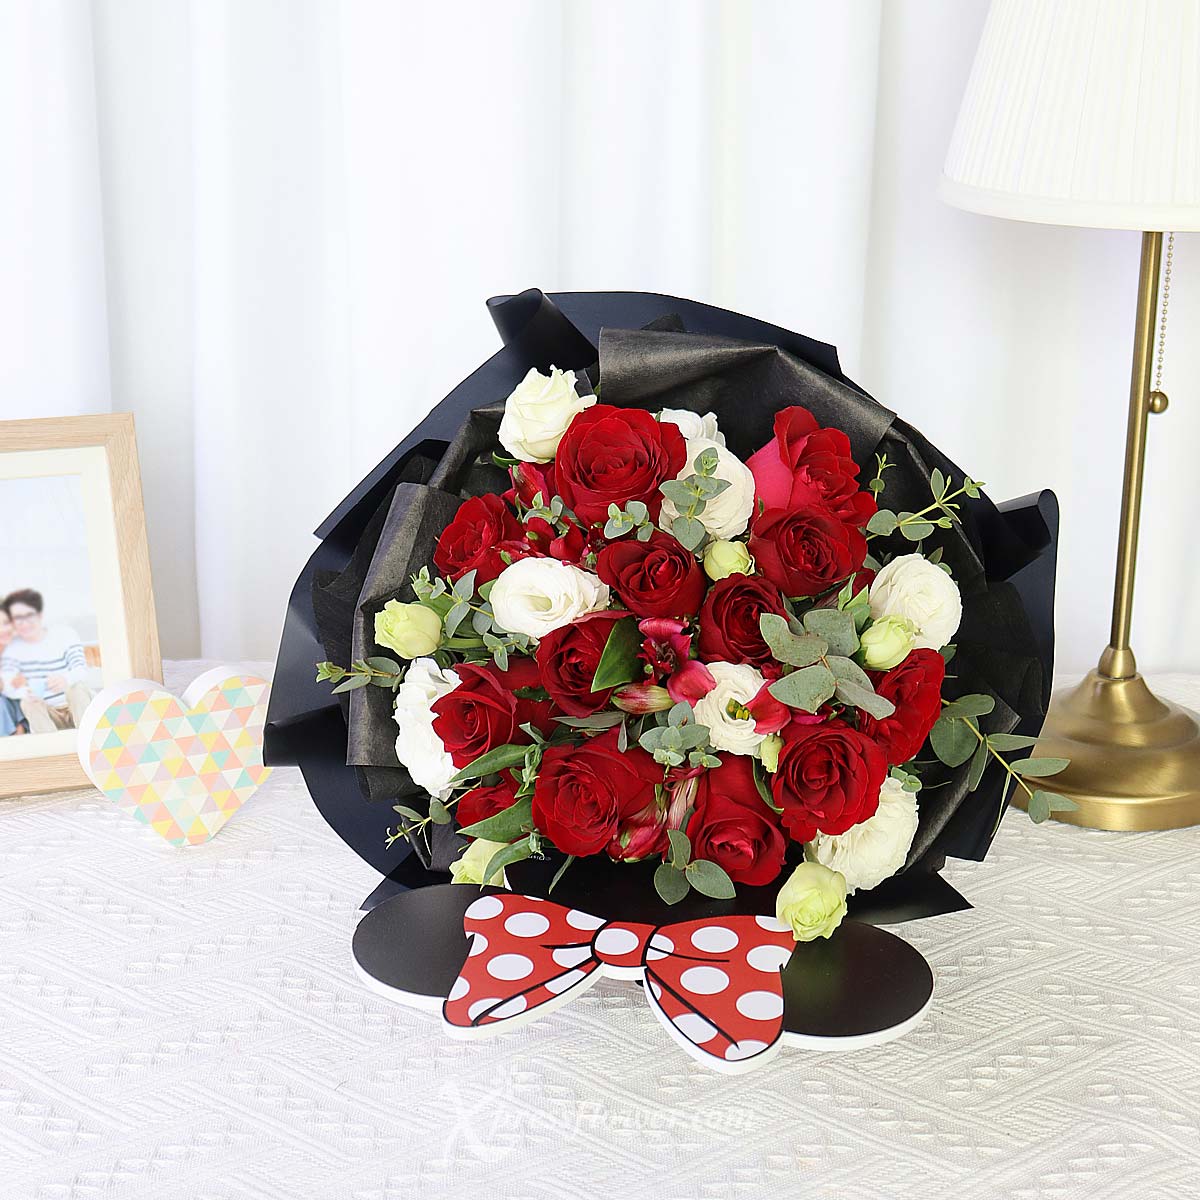 DSBQ2301 Rouge Flattery (12 Red Roses Disney Bouquet) 3a